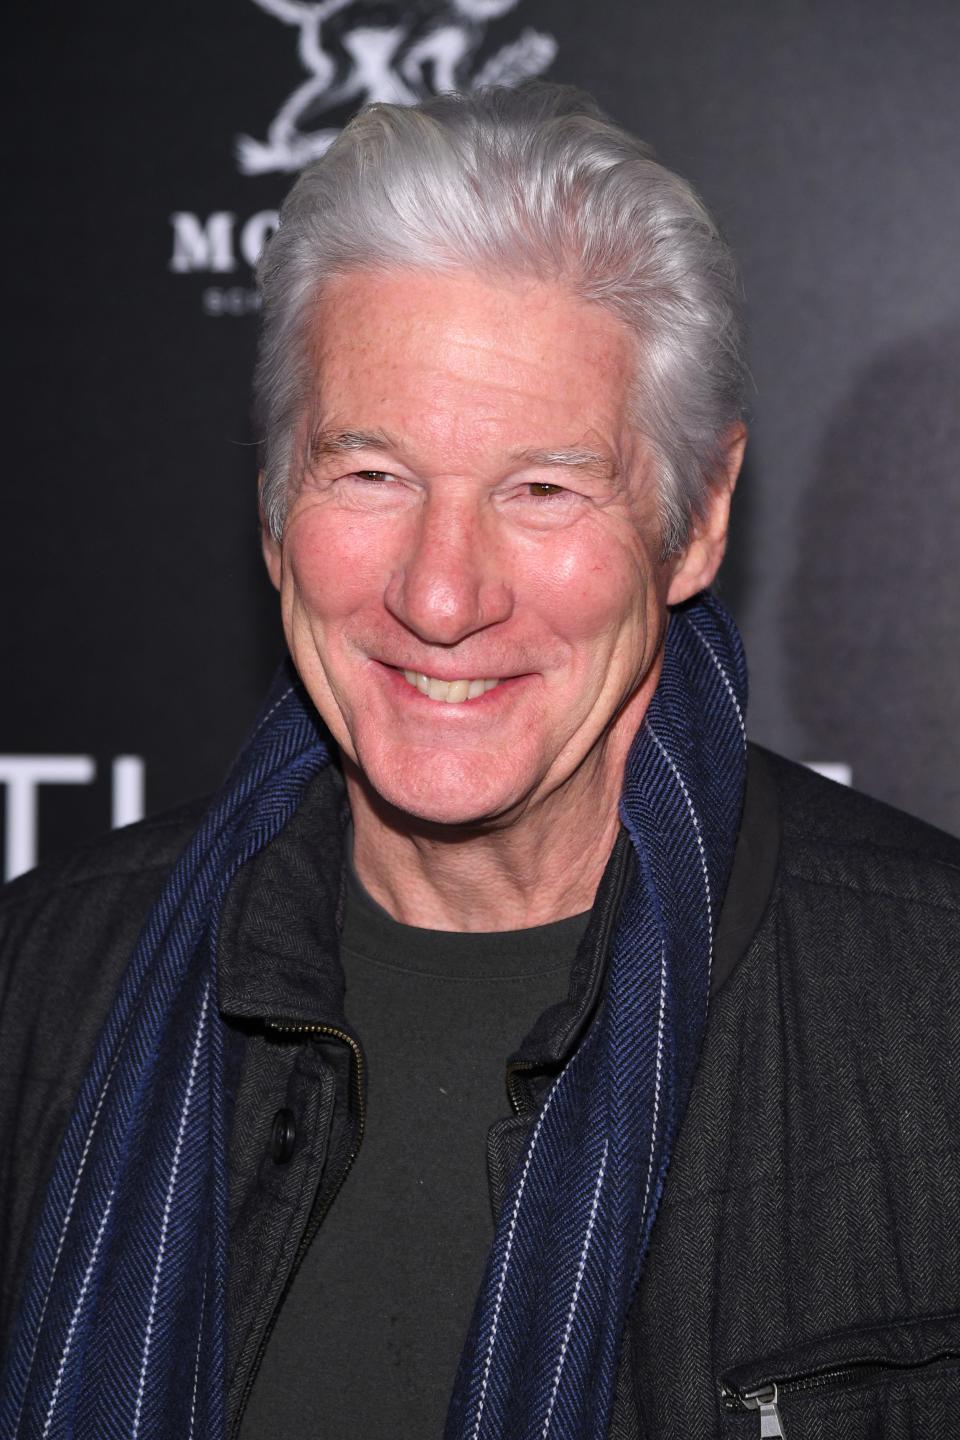 Richard Gere attends a screening of "Three Christs"  on January 09, 2020 in New York City.  The actor has listed his Pound Ridge property for sale for $28 million.